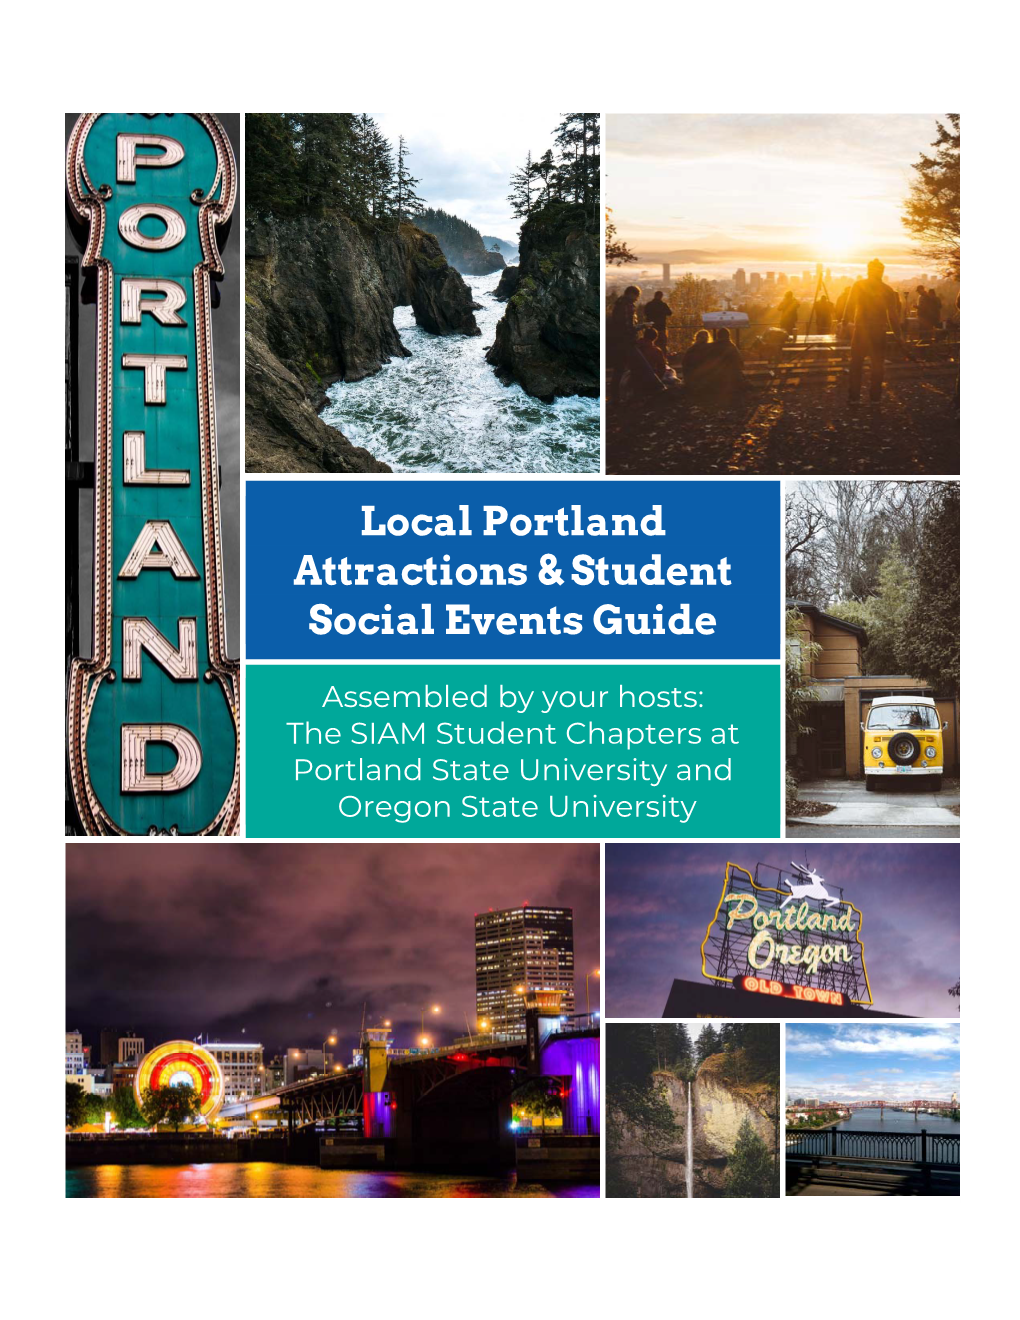 Local Portland Attractions & Student Social Events Guide